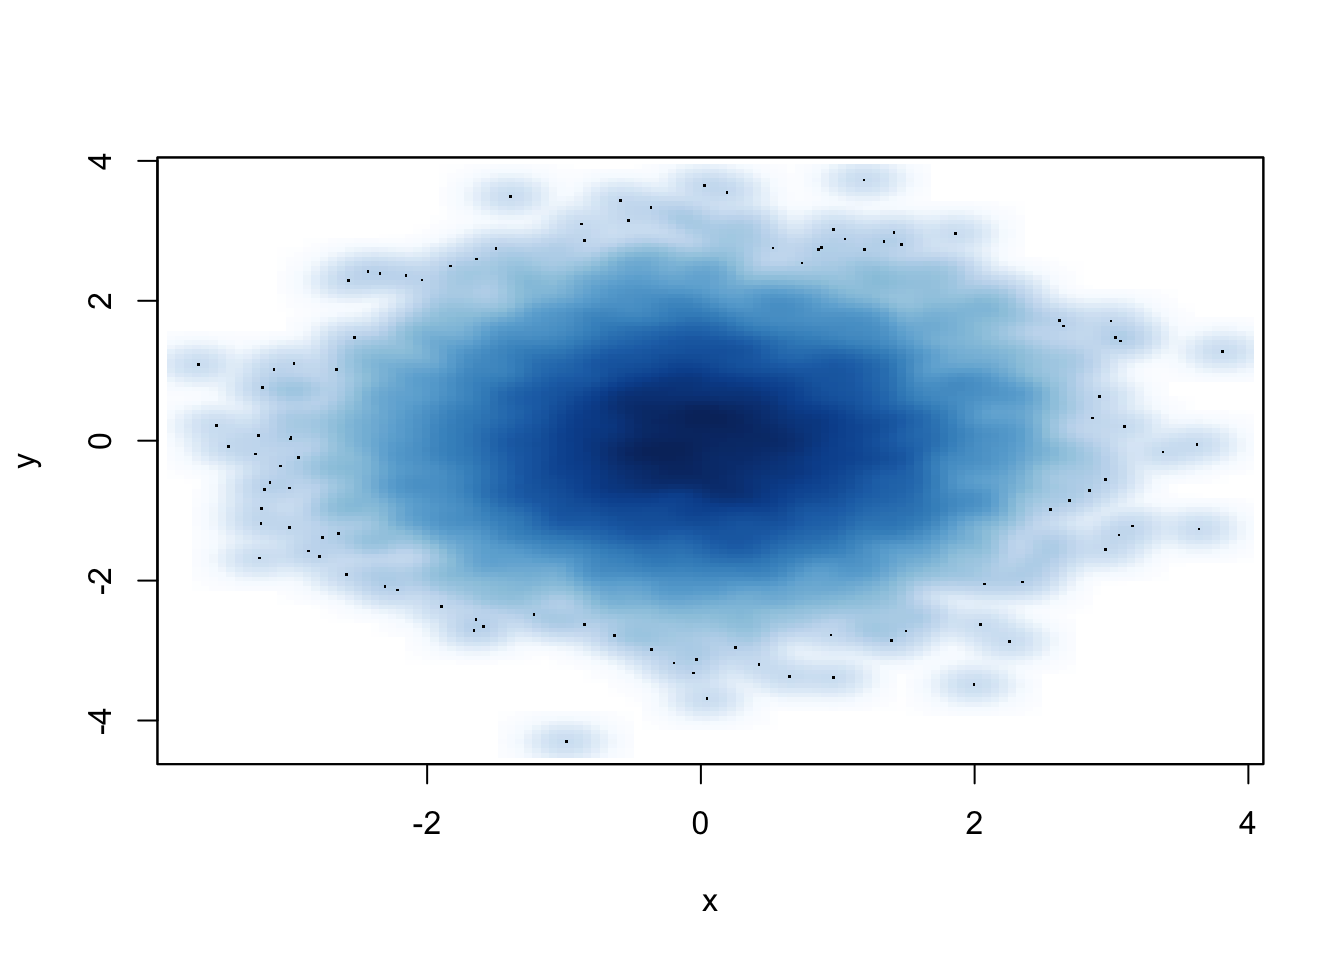 smoothScatter function